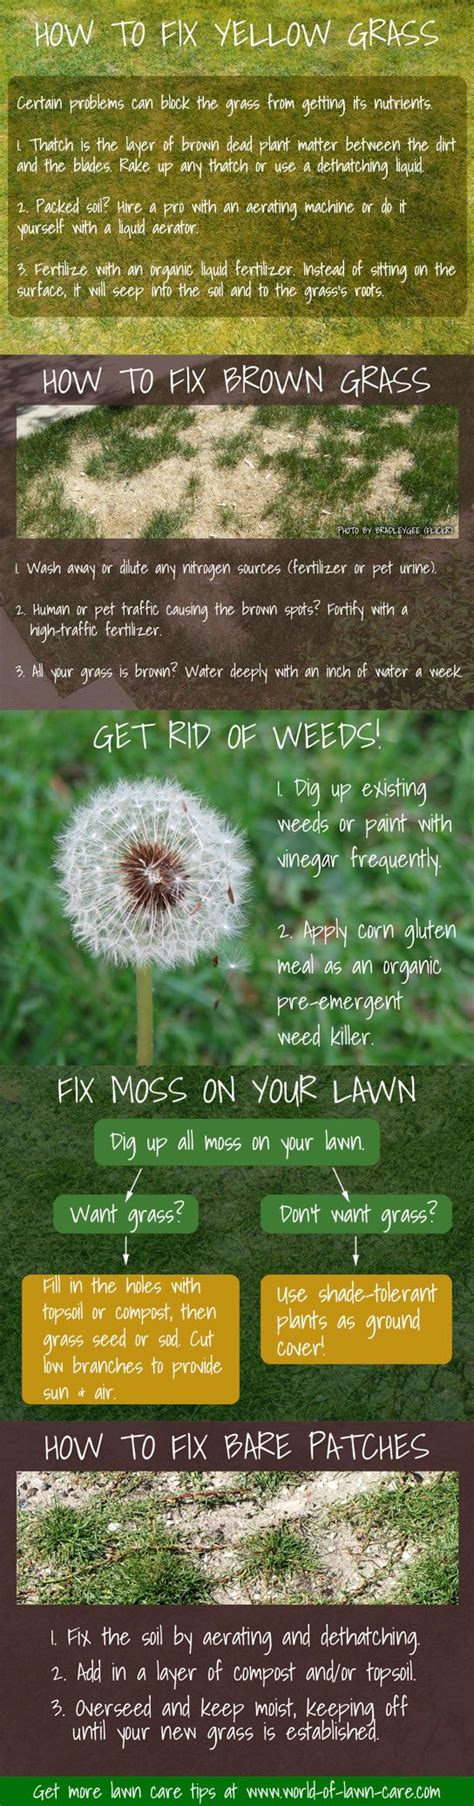 32 Best Images About Lawn Care Business Tips On Pinterest